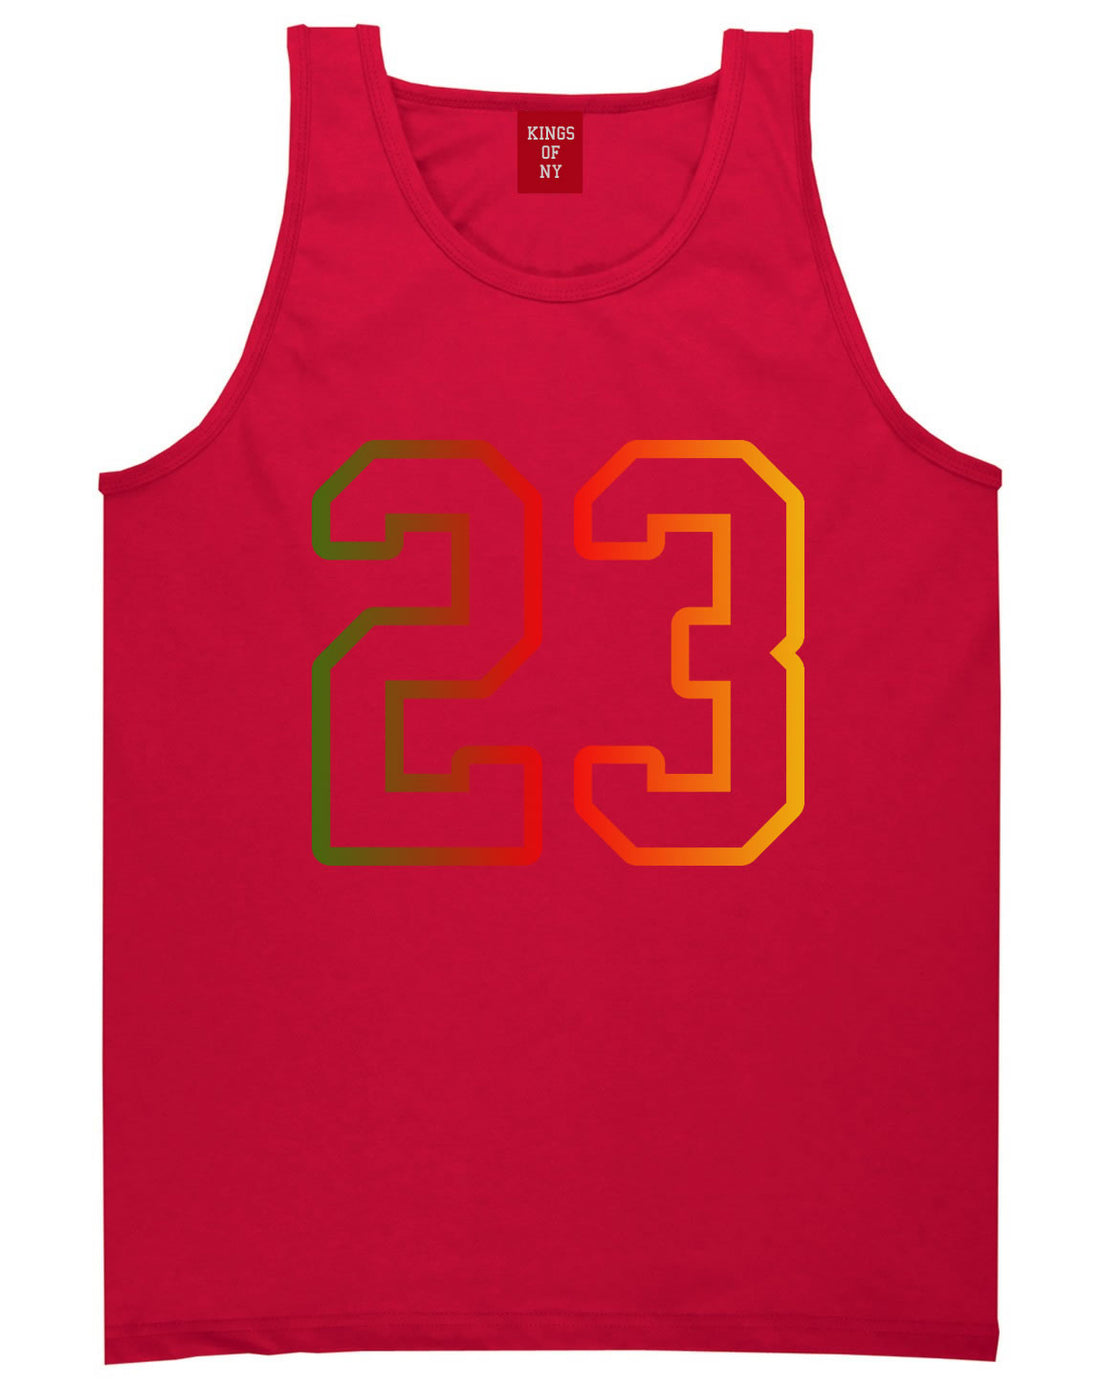 23 Cement Print Colorful Jersey Tank Top in Red By Kings Of NY